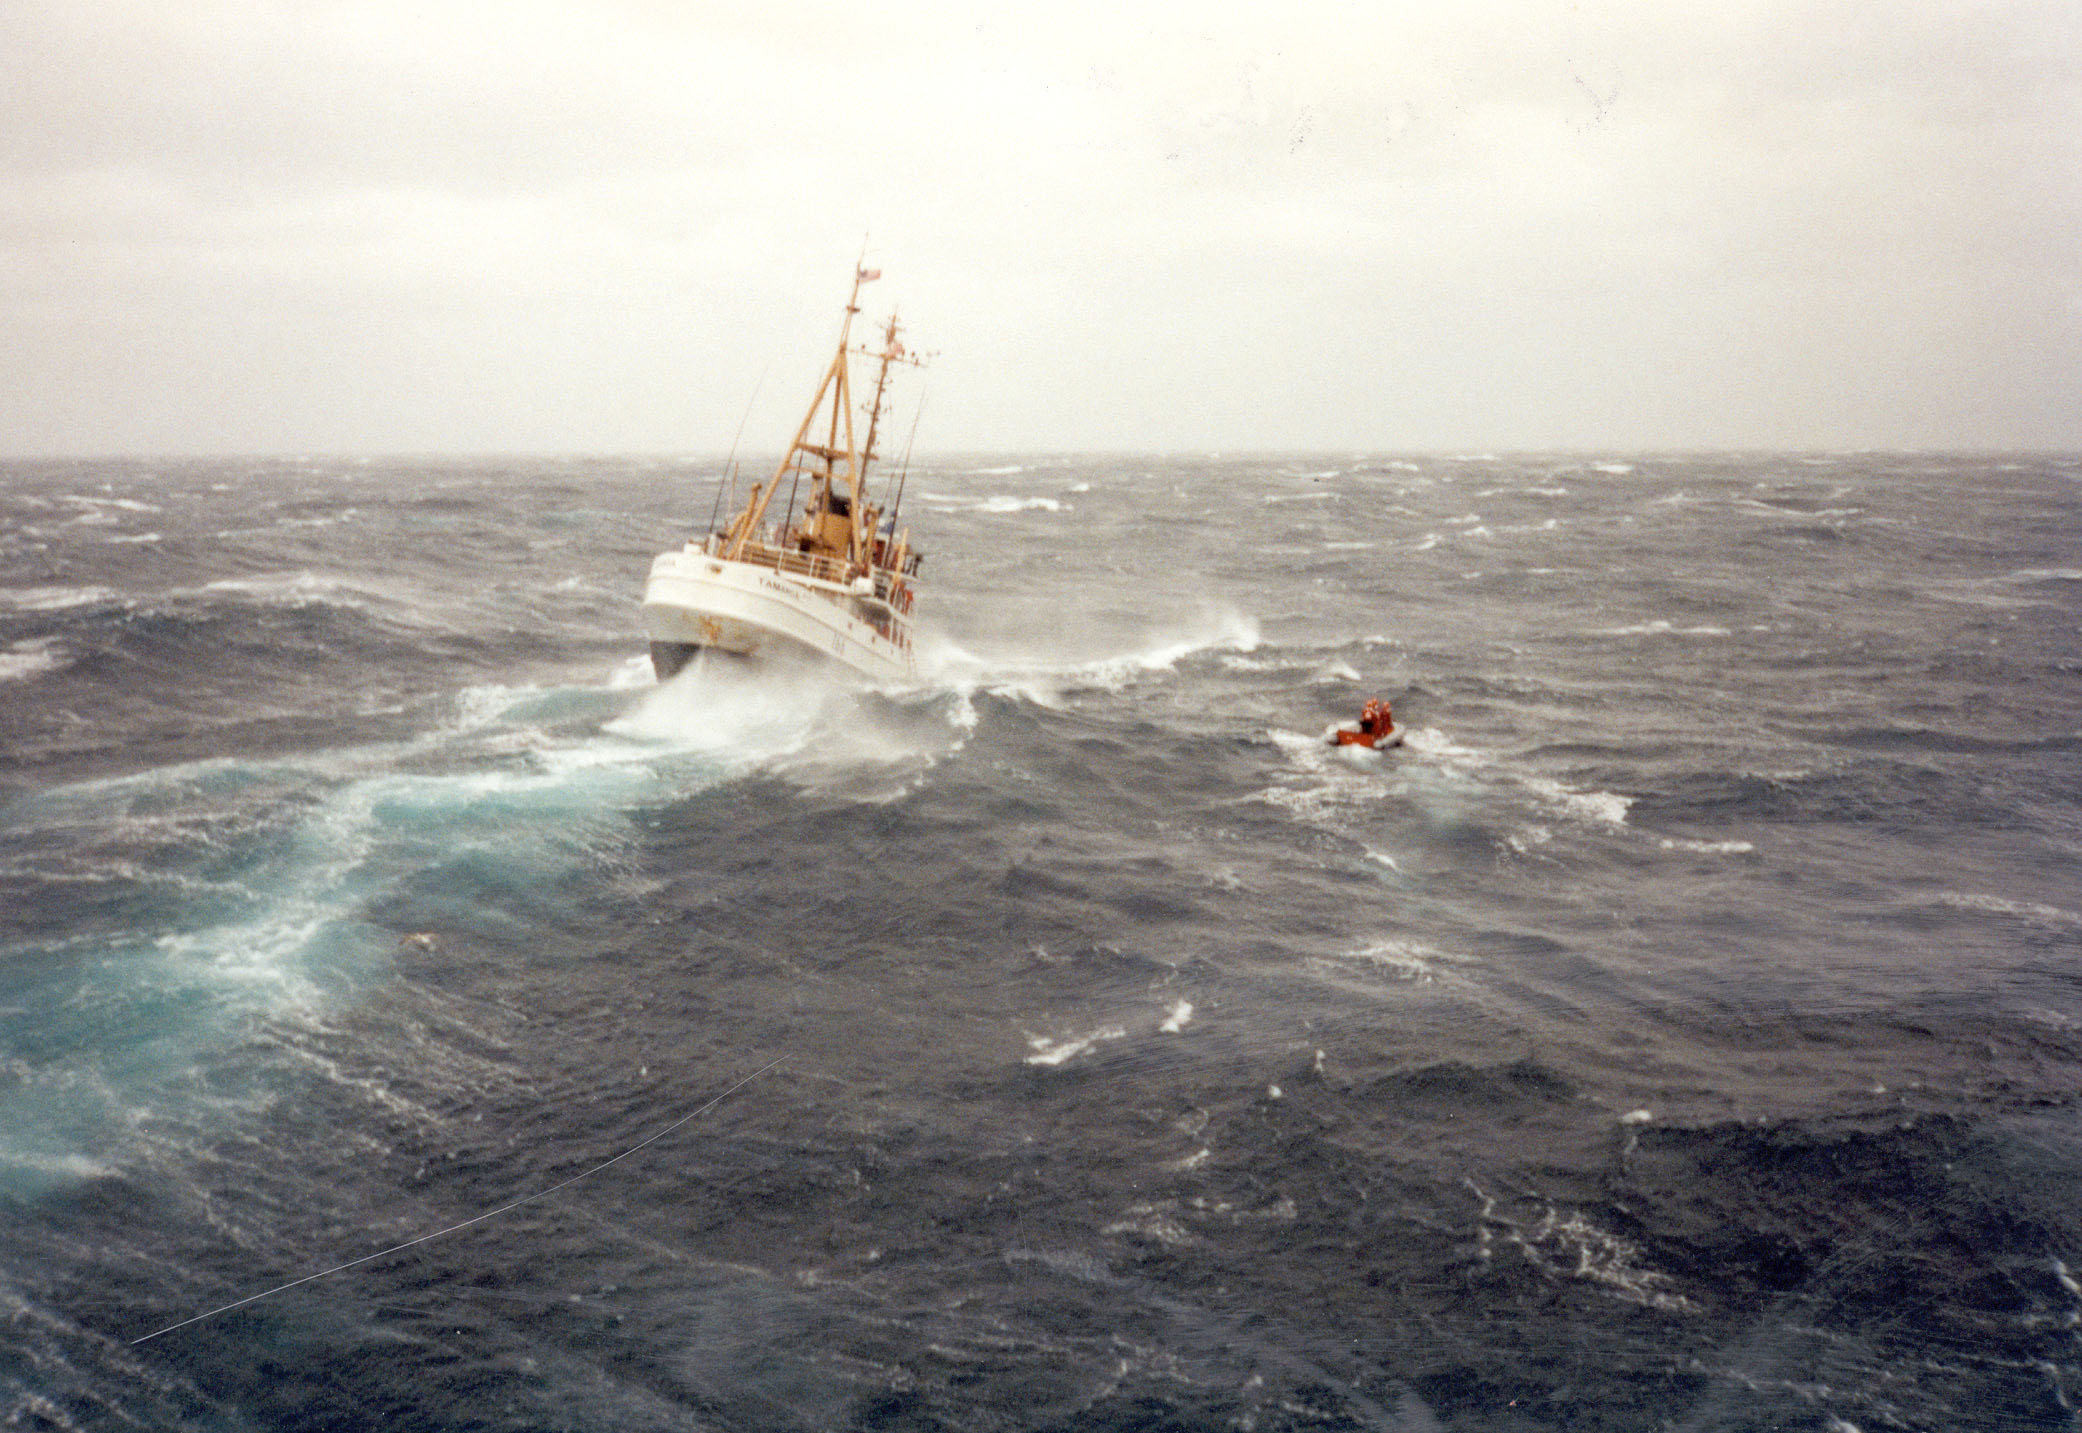 USCGC Tamaroa (WHEC-166) pitches and rolls in heavy seas during the rescue of Satori, during "The Perfect Storm". (U.S. Coast Guard)